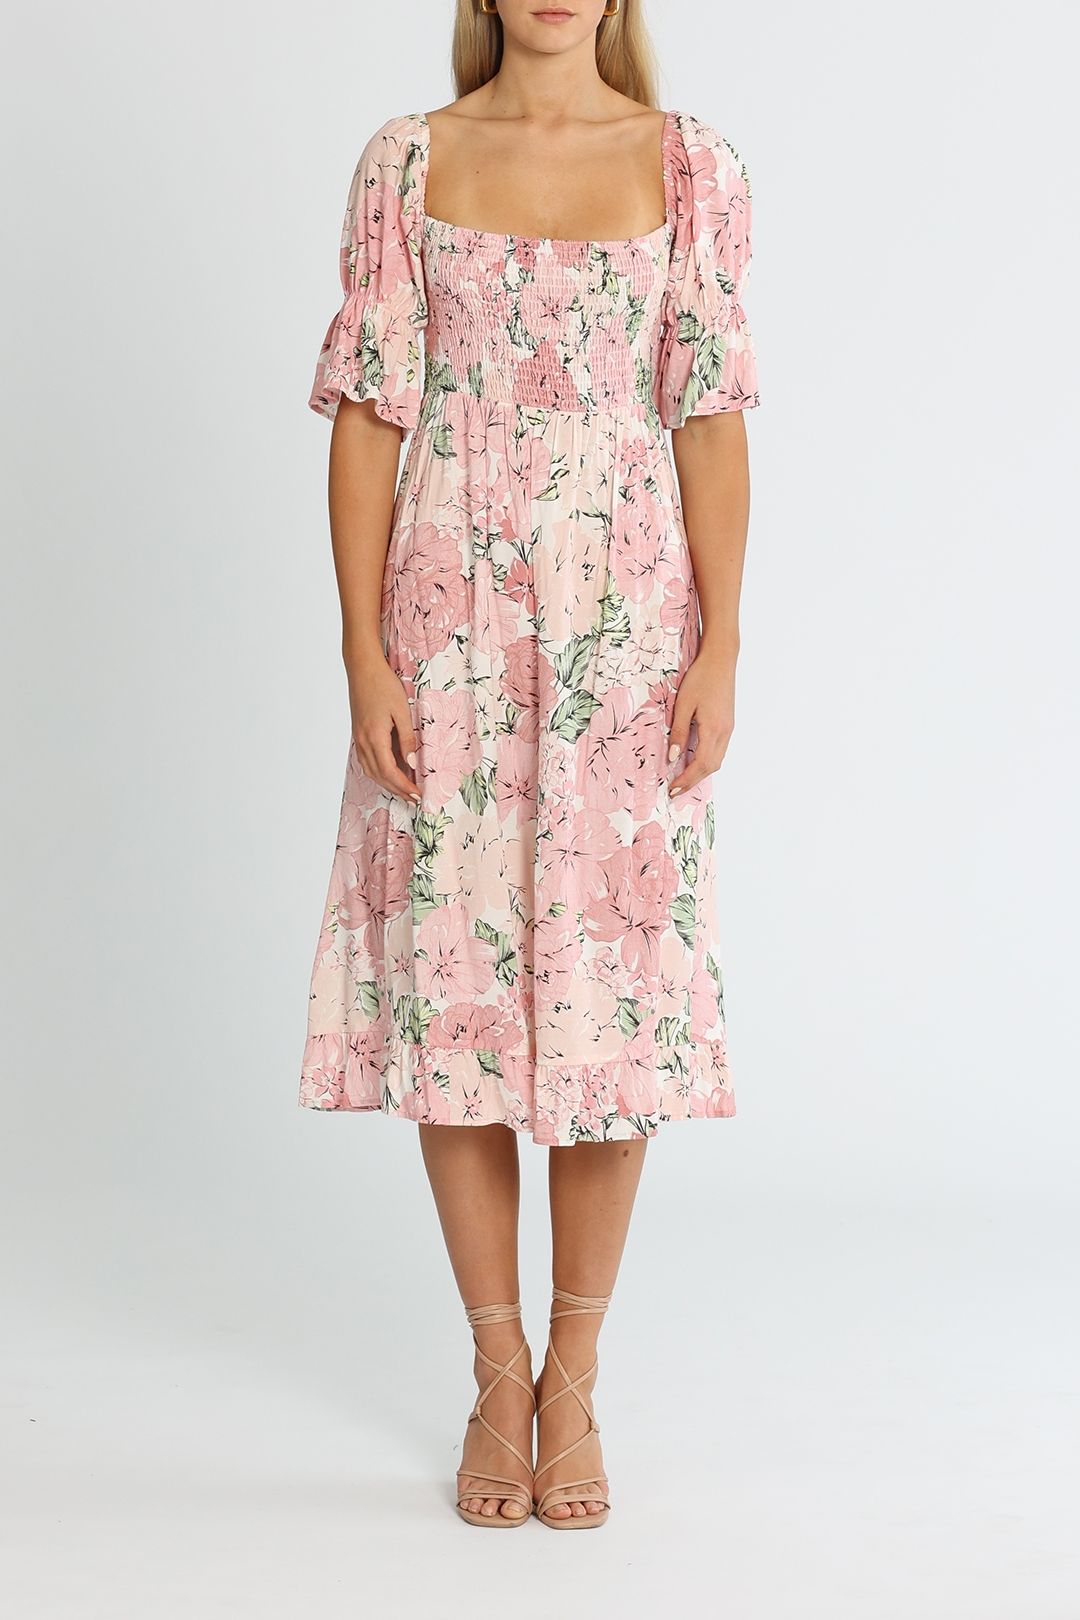 Girl and the Sun Soleil Midi Dress Pink Floral Print